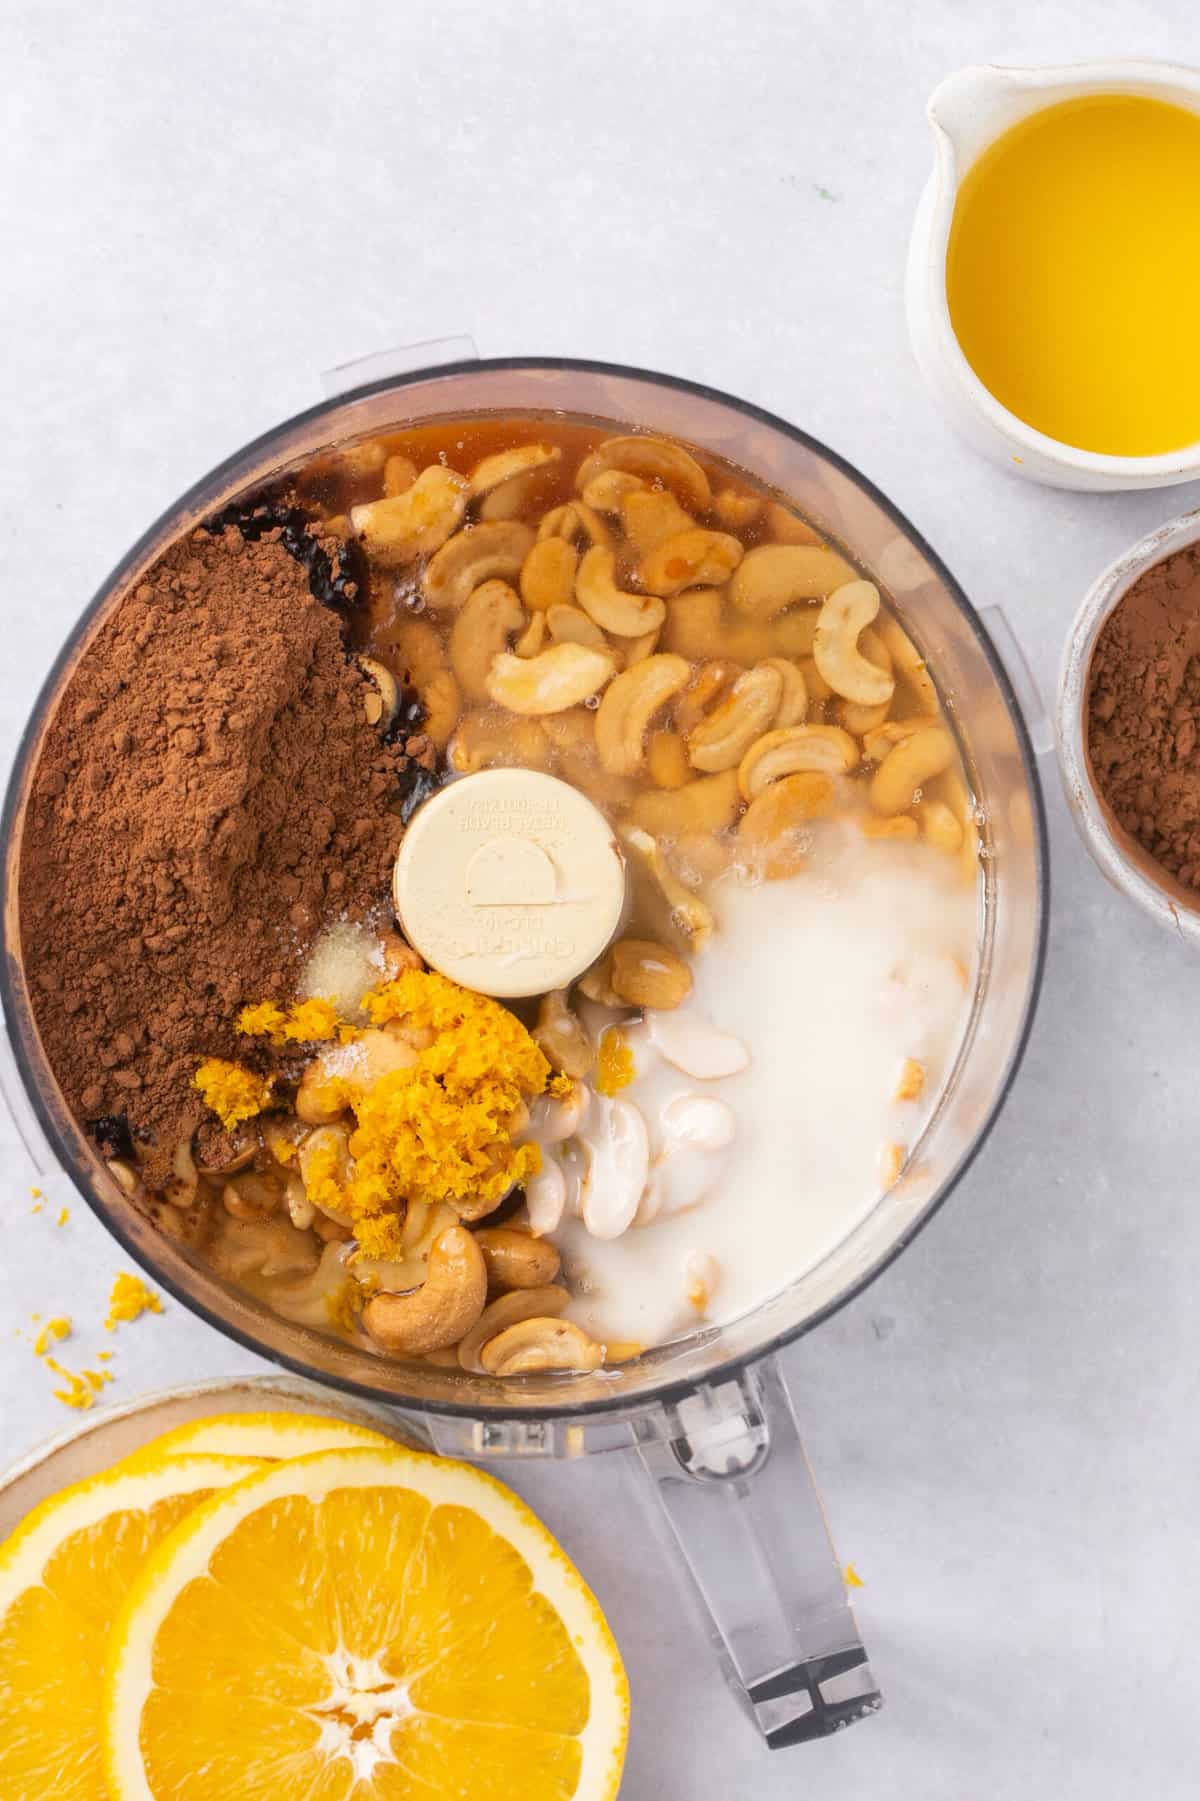 Orange juice, cashews, cocoa powder and maple syrup in a food processor. 